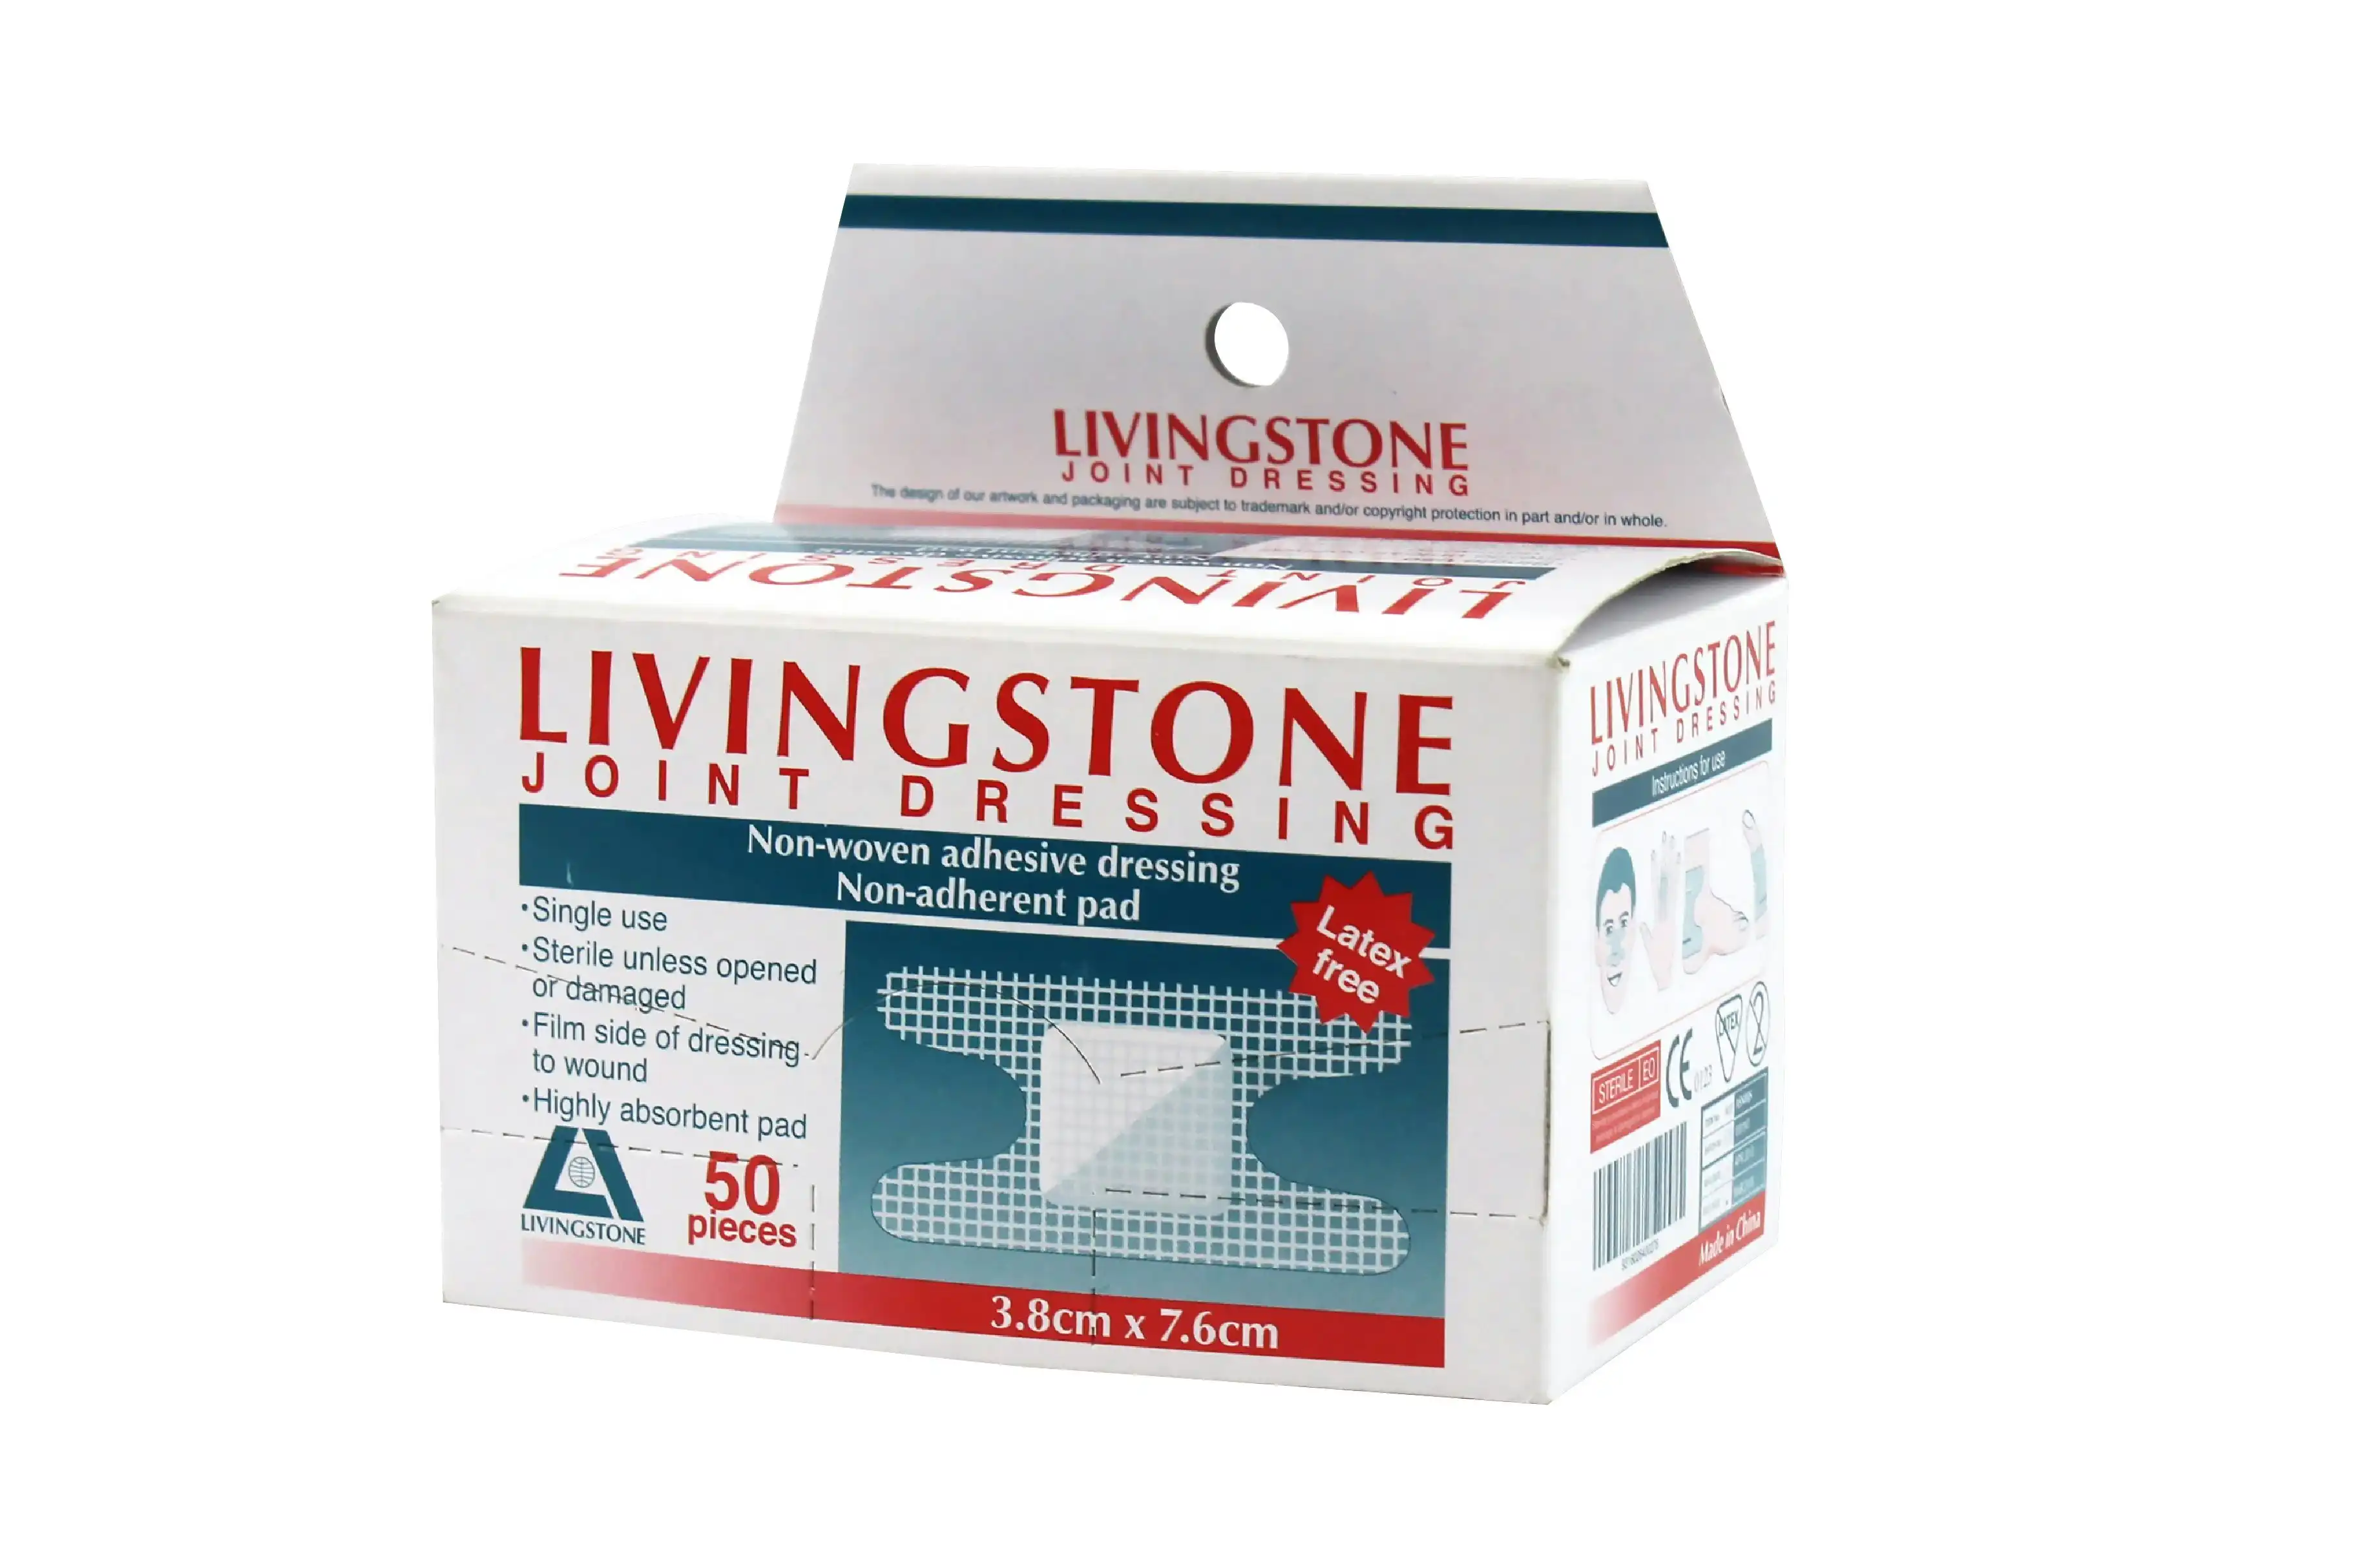 Livingstone Adhesive "H" Shape Joint Knuckle Dressing with Non-Adherent Pad Small 3.8 x 7.6cm 50 Box